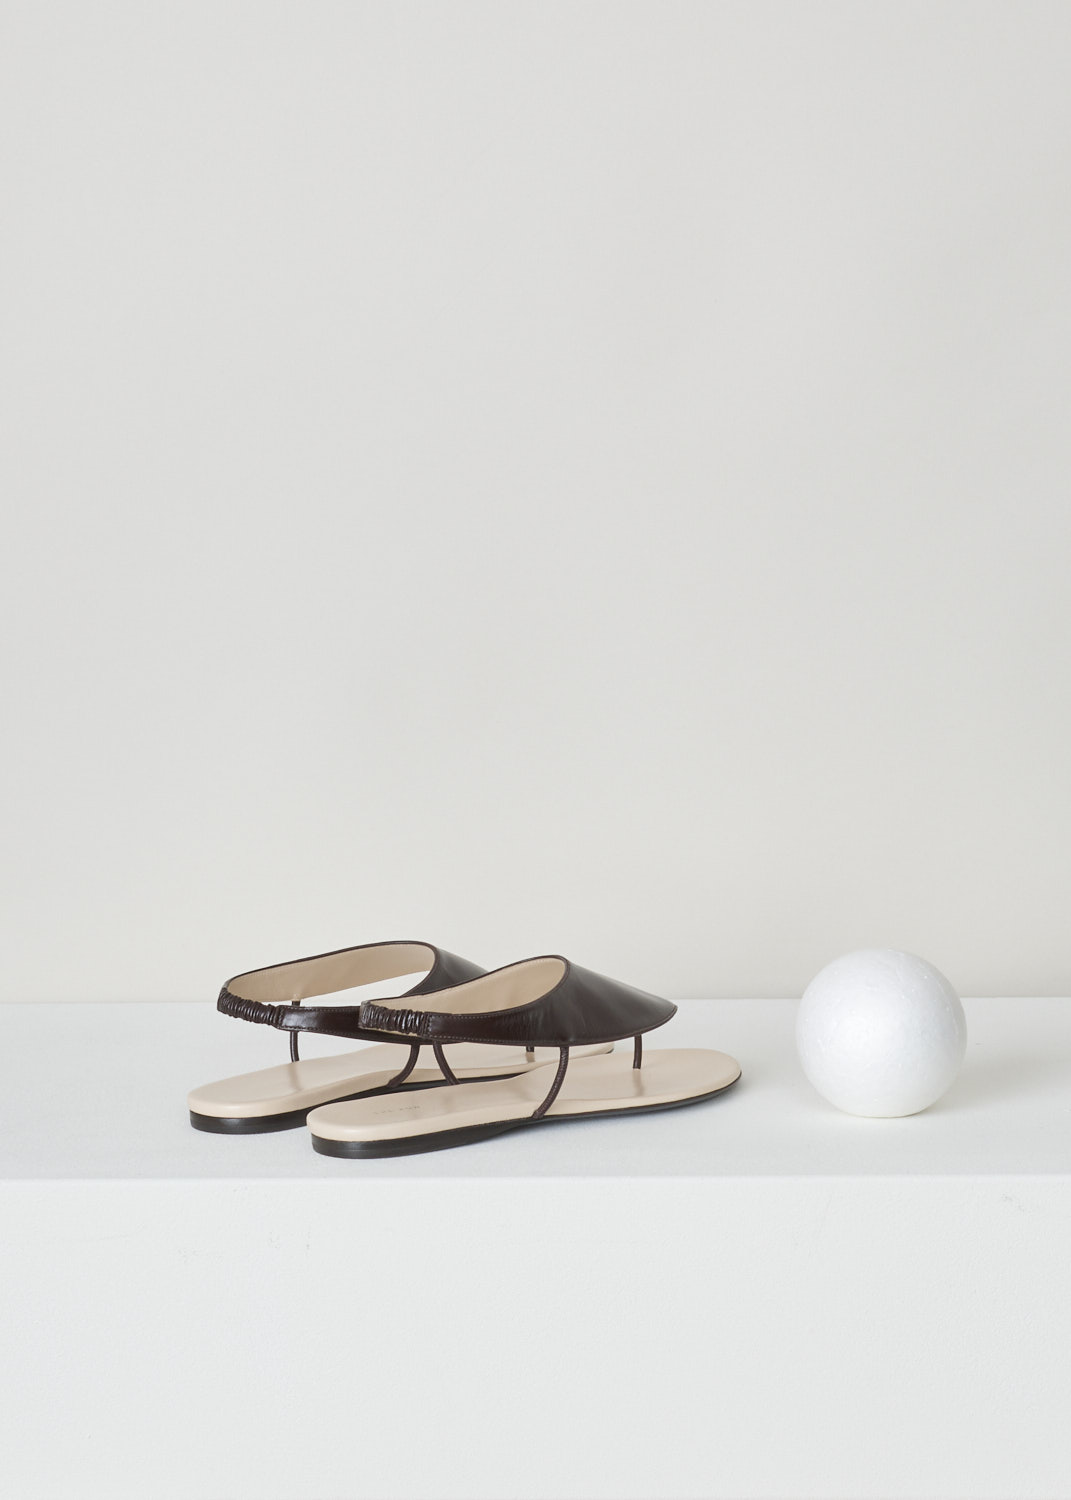 The Row, Dark brown ravello thong sandal, F1155_L35_DBR, brown, back, Ravelo slip-on sandals from The Row. Coloured to a lovely shade of dark brown. Featuring a round and open toe vamp and comes with an elastic slingback strap. 